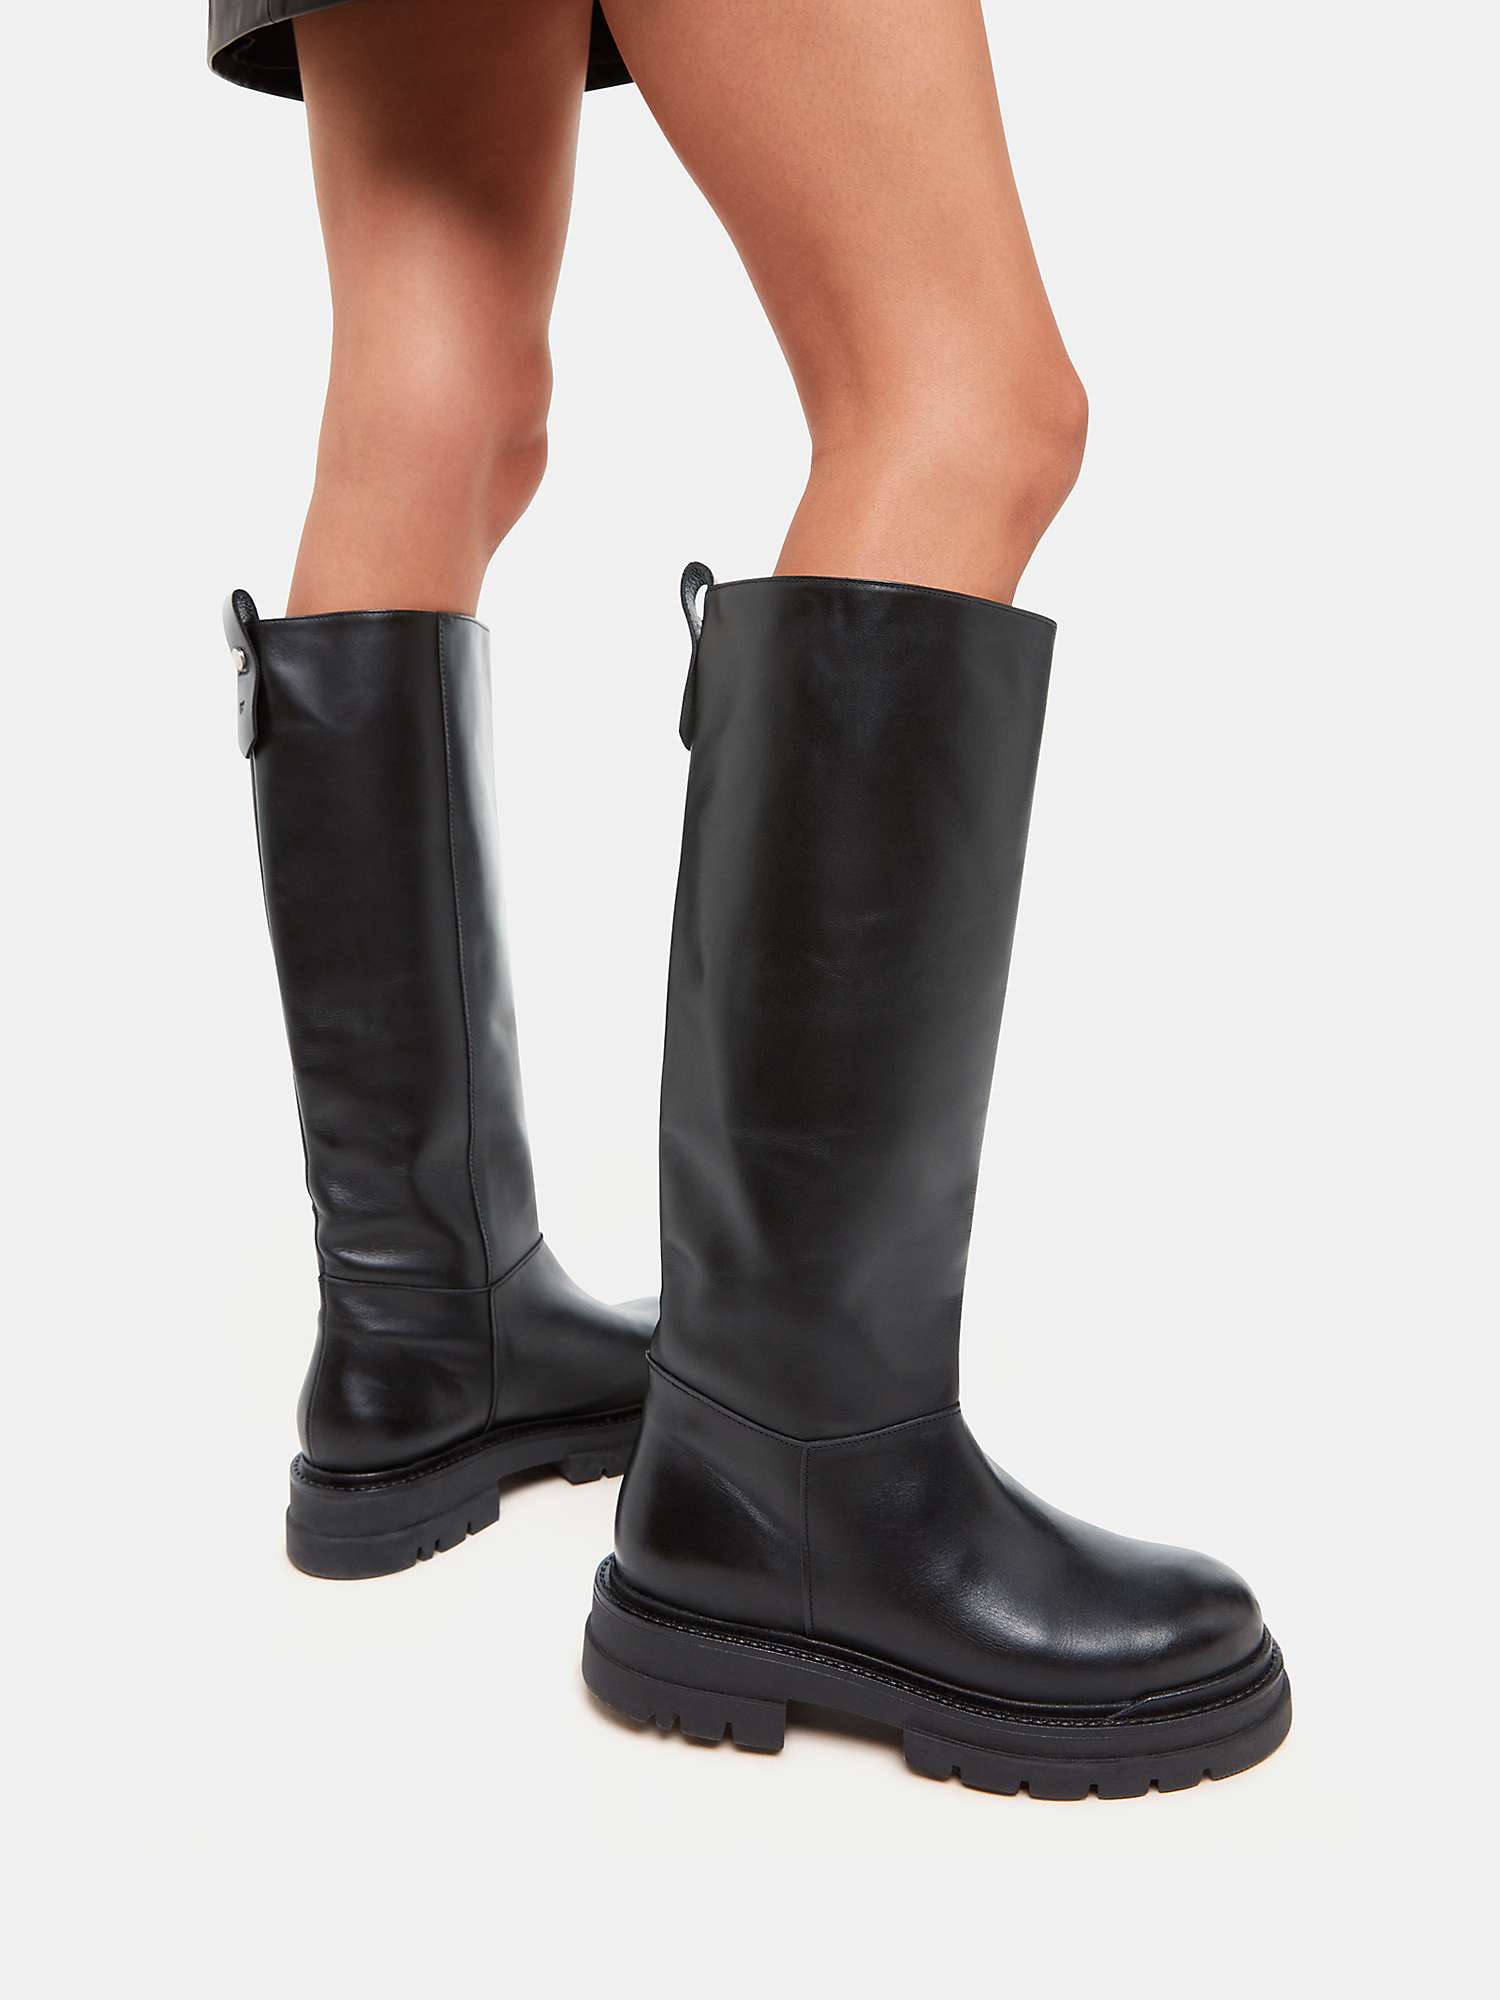 Buy Whistles Maceo Lug Sole Leather Knee High Boots, Black Online at johnlewis.com